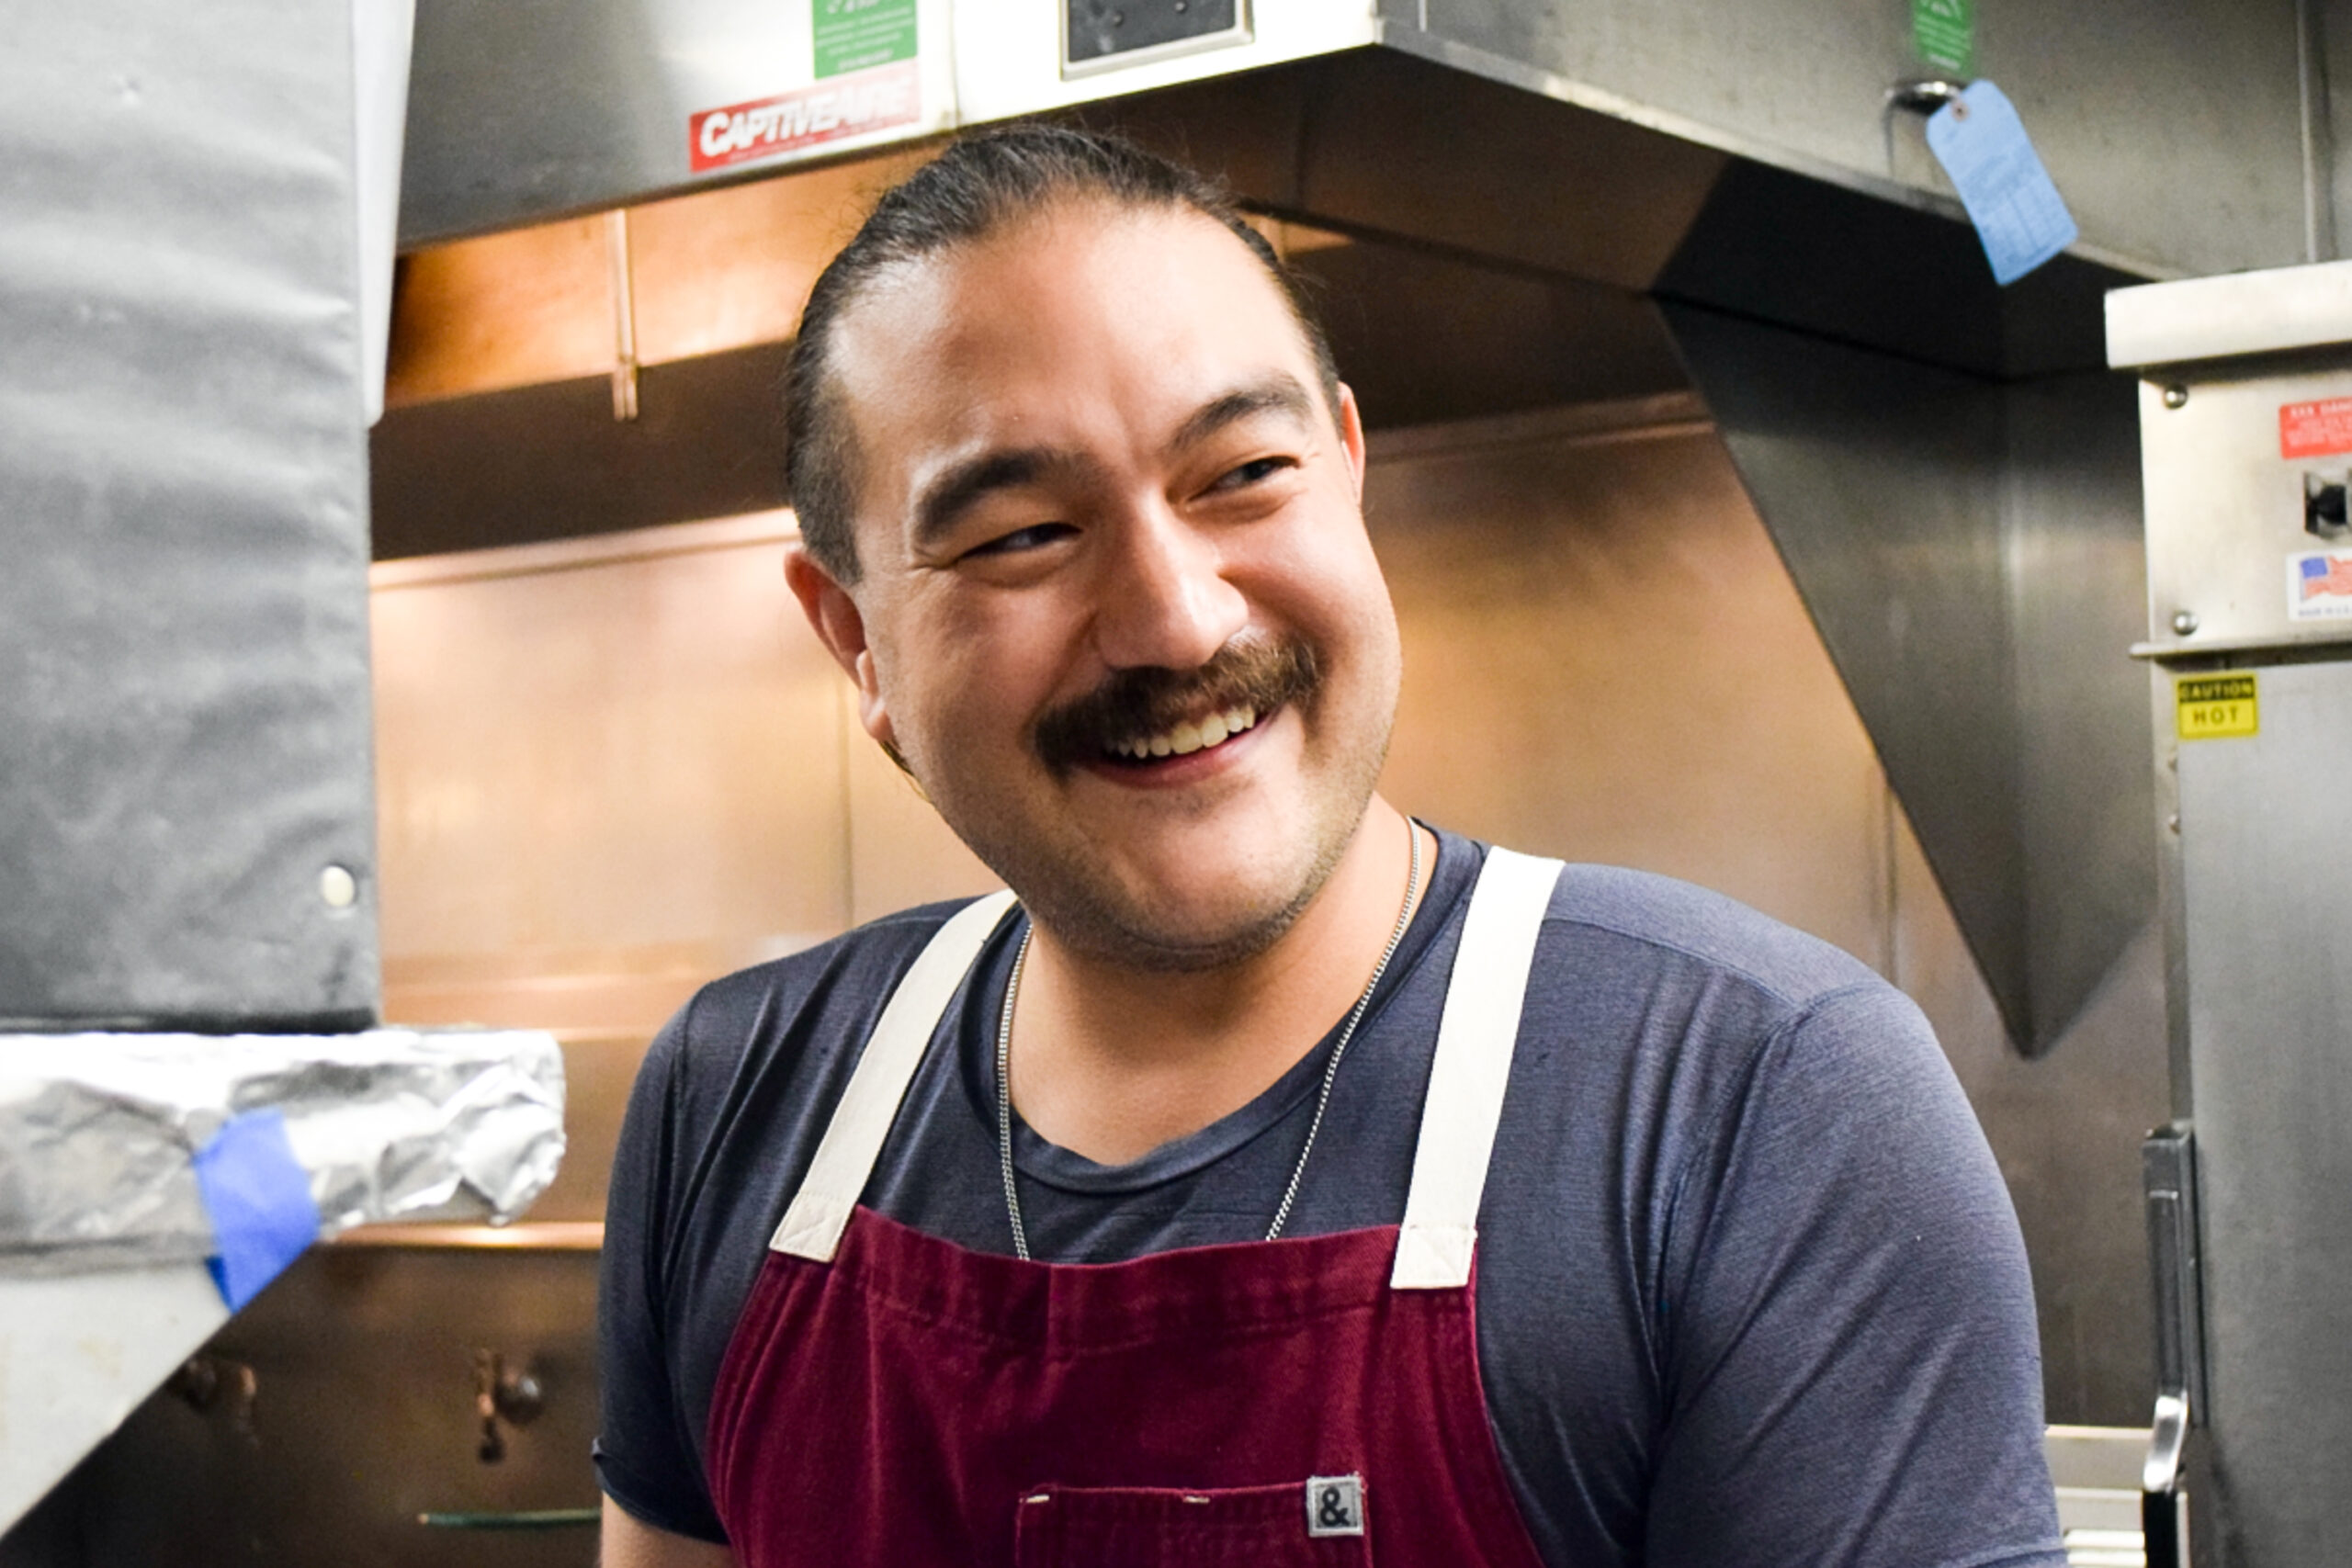 A close up of a middle aged fair-skinned man in a commercial kitchen smiling at someone off camera.